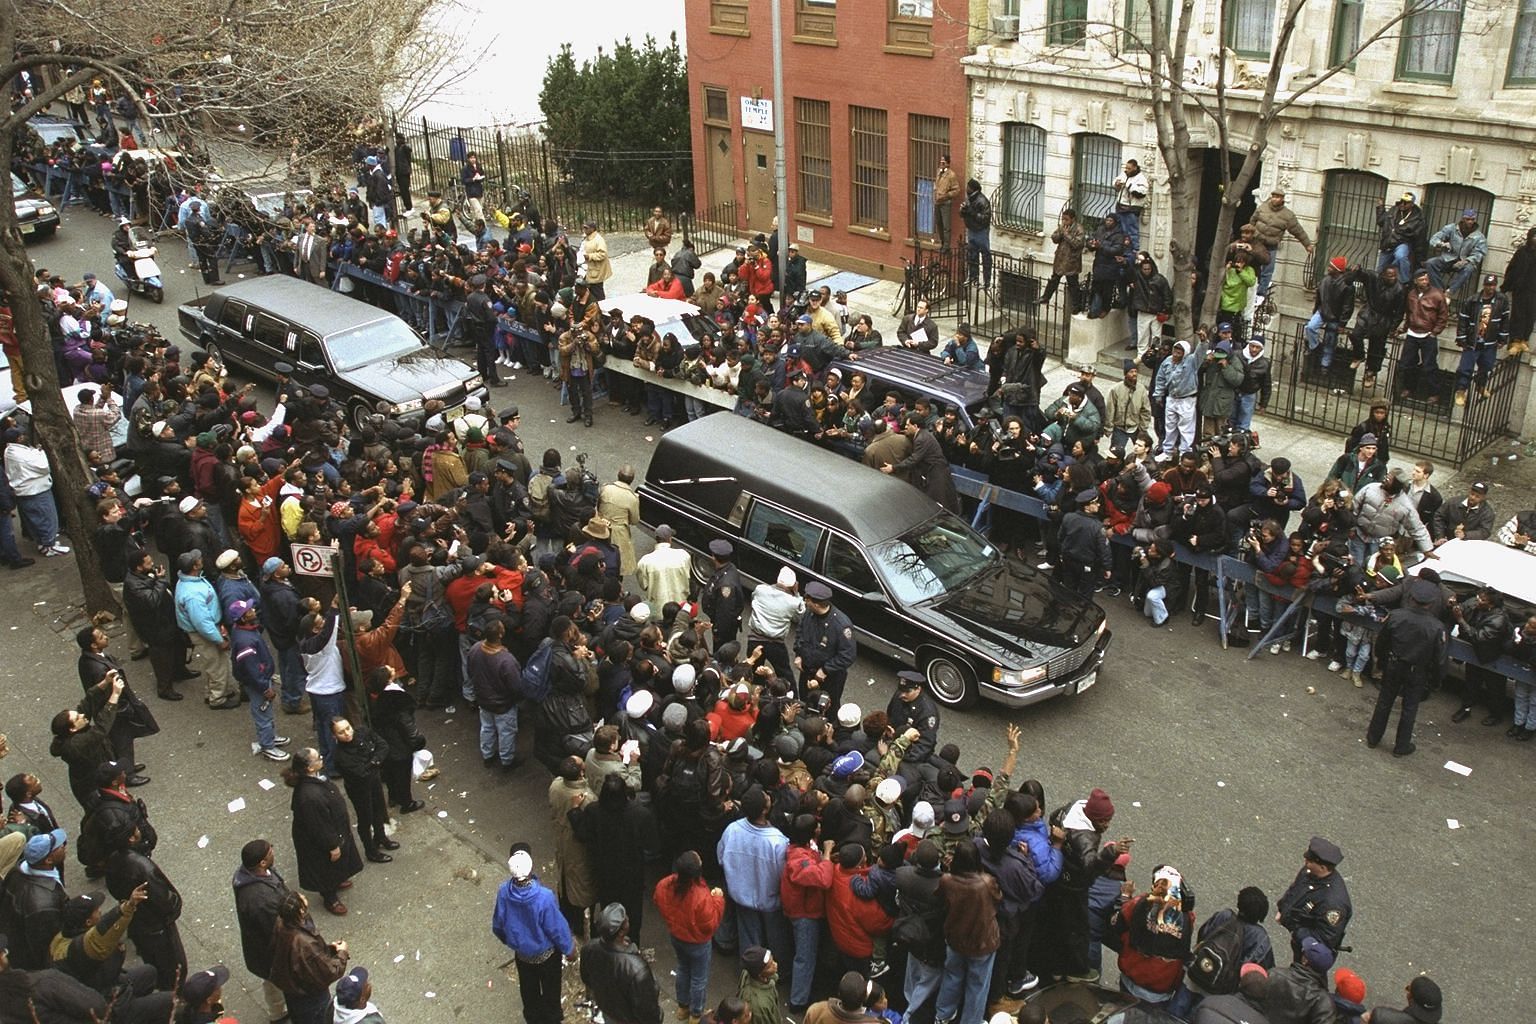 The procession for the funeral of Notorious B.I.G. (Image via Reuters)